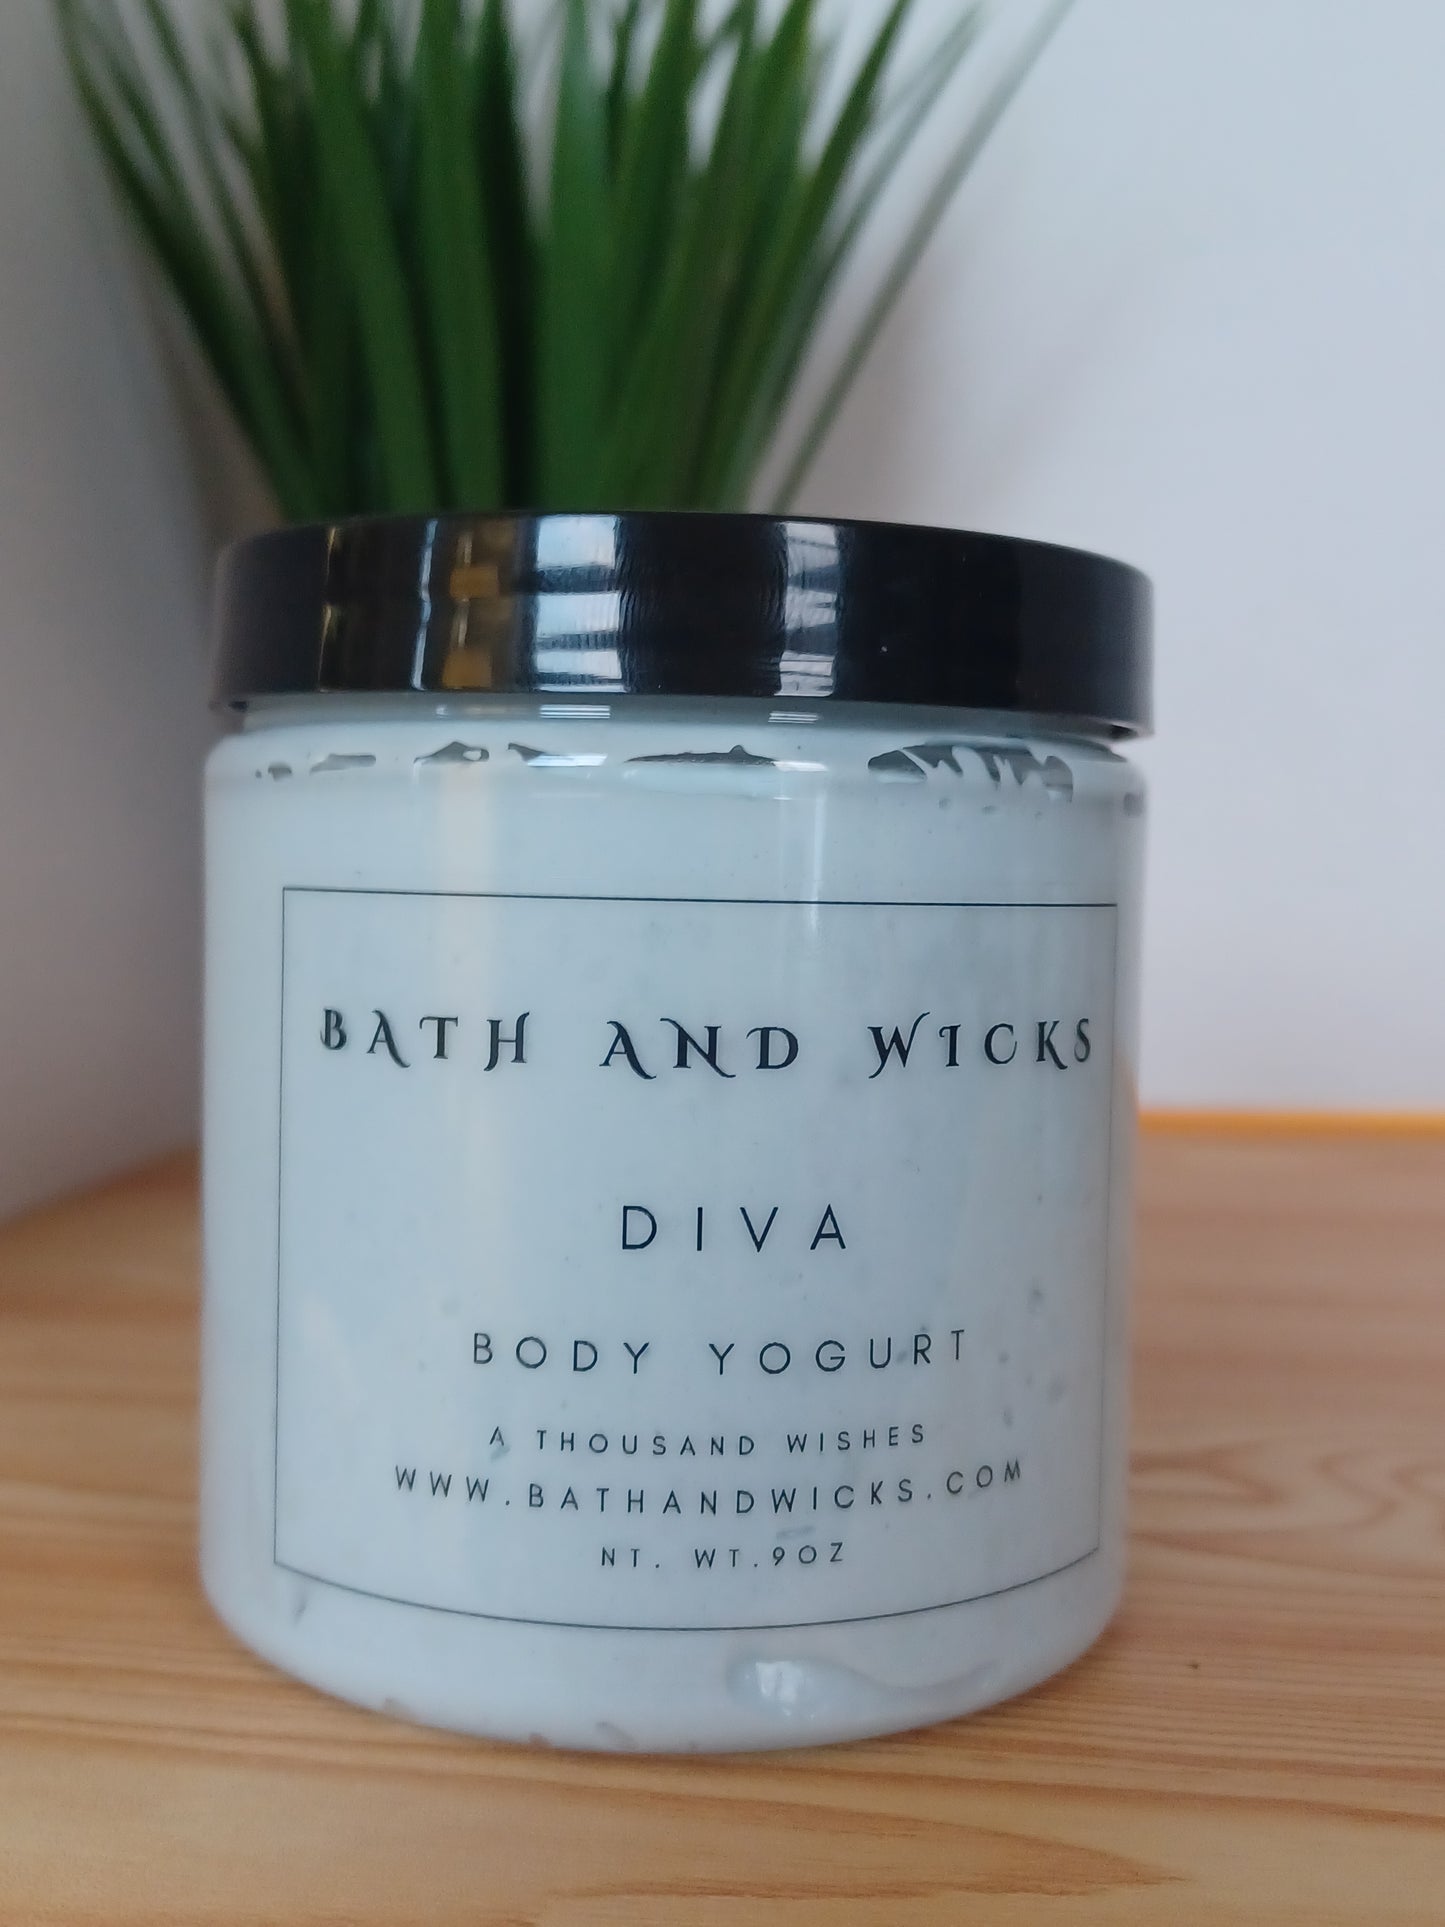 Luxurious thick and creamy body yogurt. This one is colored with a very nice light blue and is scented with A Thousand Wishes fragrance oil.